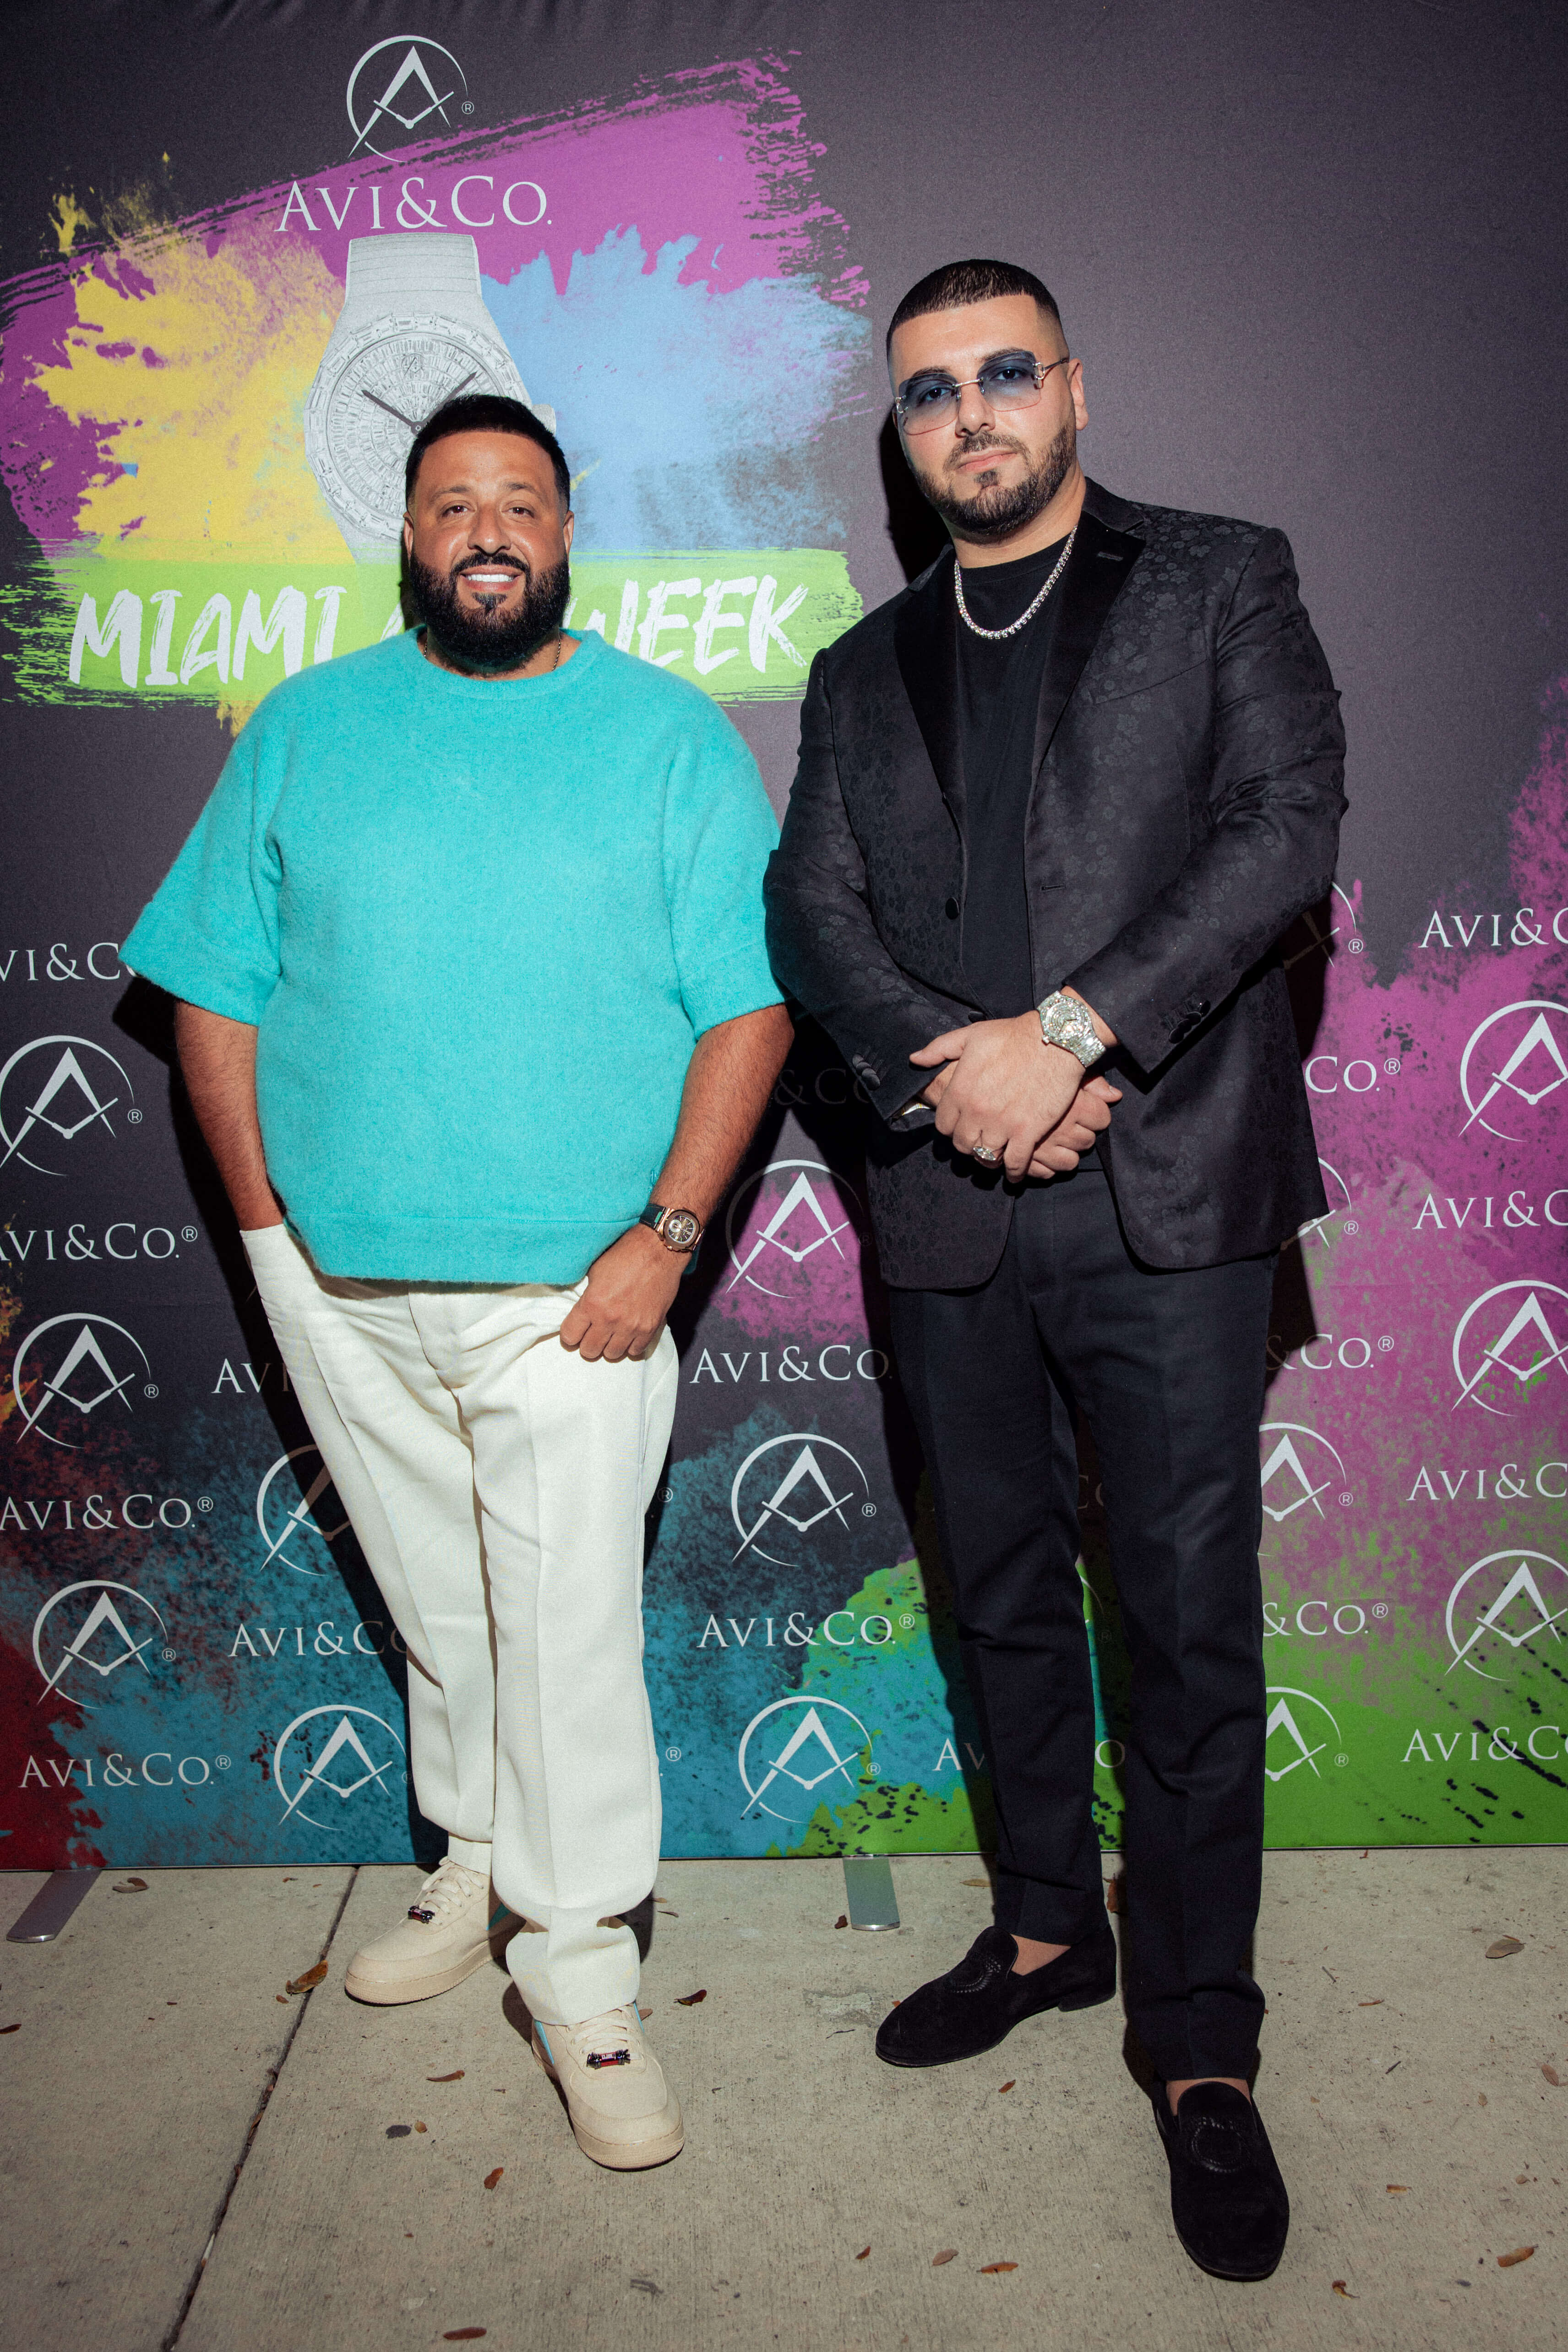 Two Men Stand in Front of Avi & Co.'s Step and Repeat. Left: Man Wears Blue T-Shirt and White Pants. Right: Man Wears Black Suit with Diamond-Pave Chain. Both Wear Luxury Timepieces.